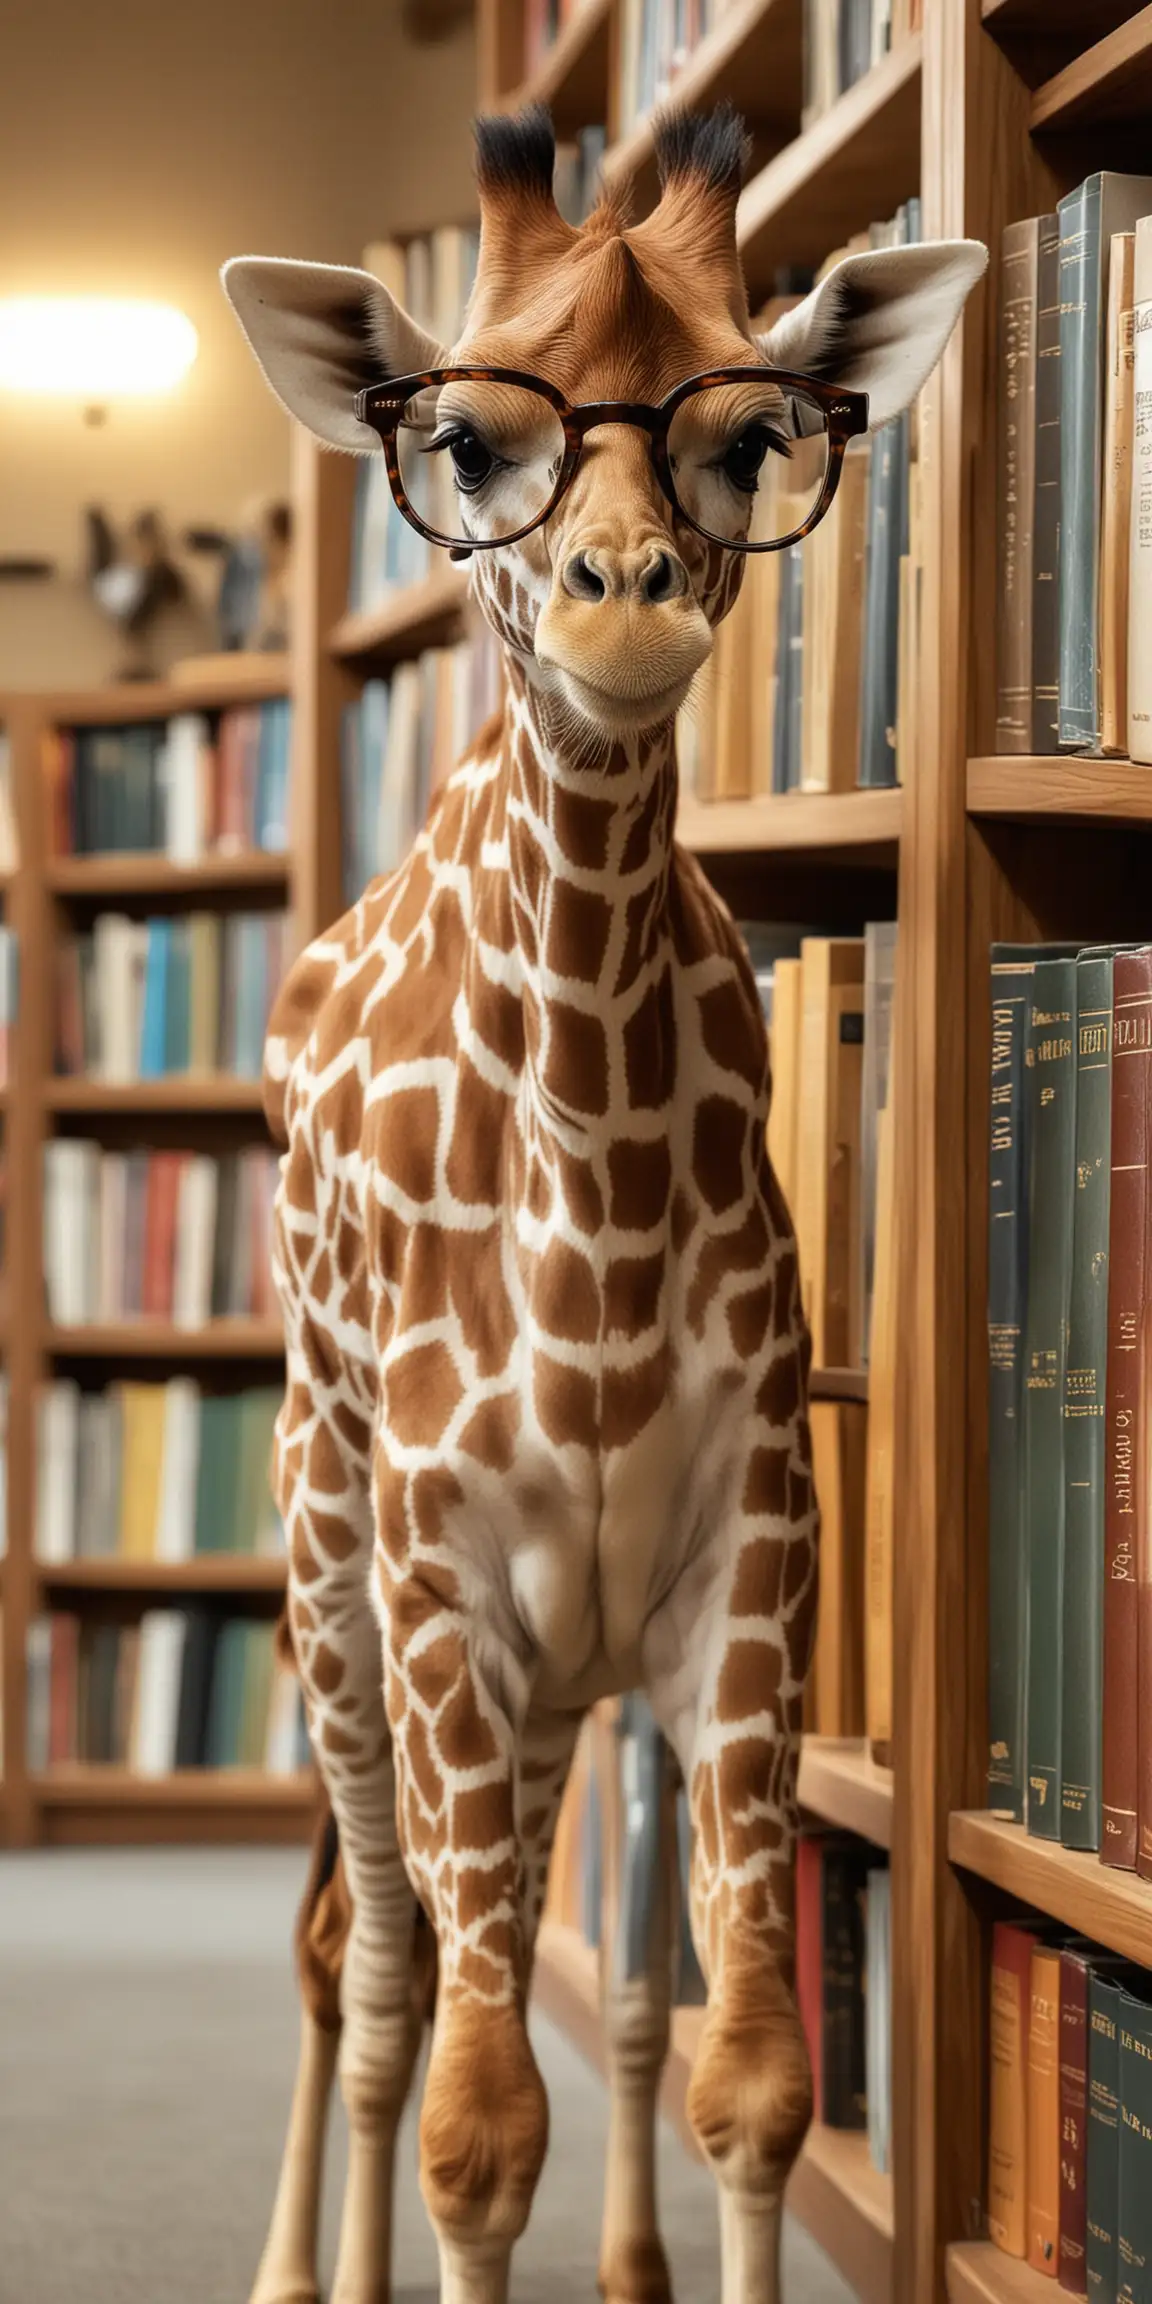 Cute Baby Giraffe Wearing Glasses Explores a Cozy Library